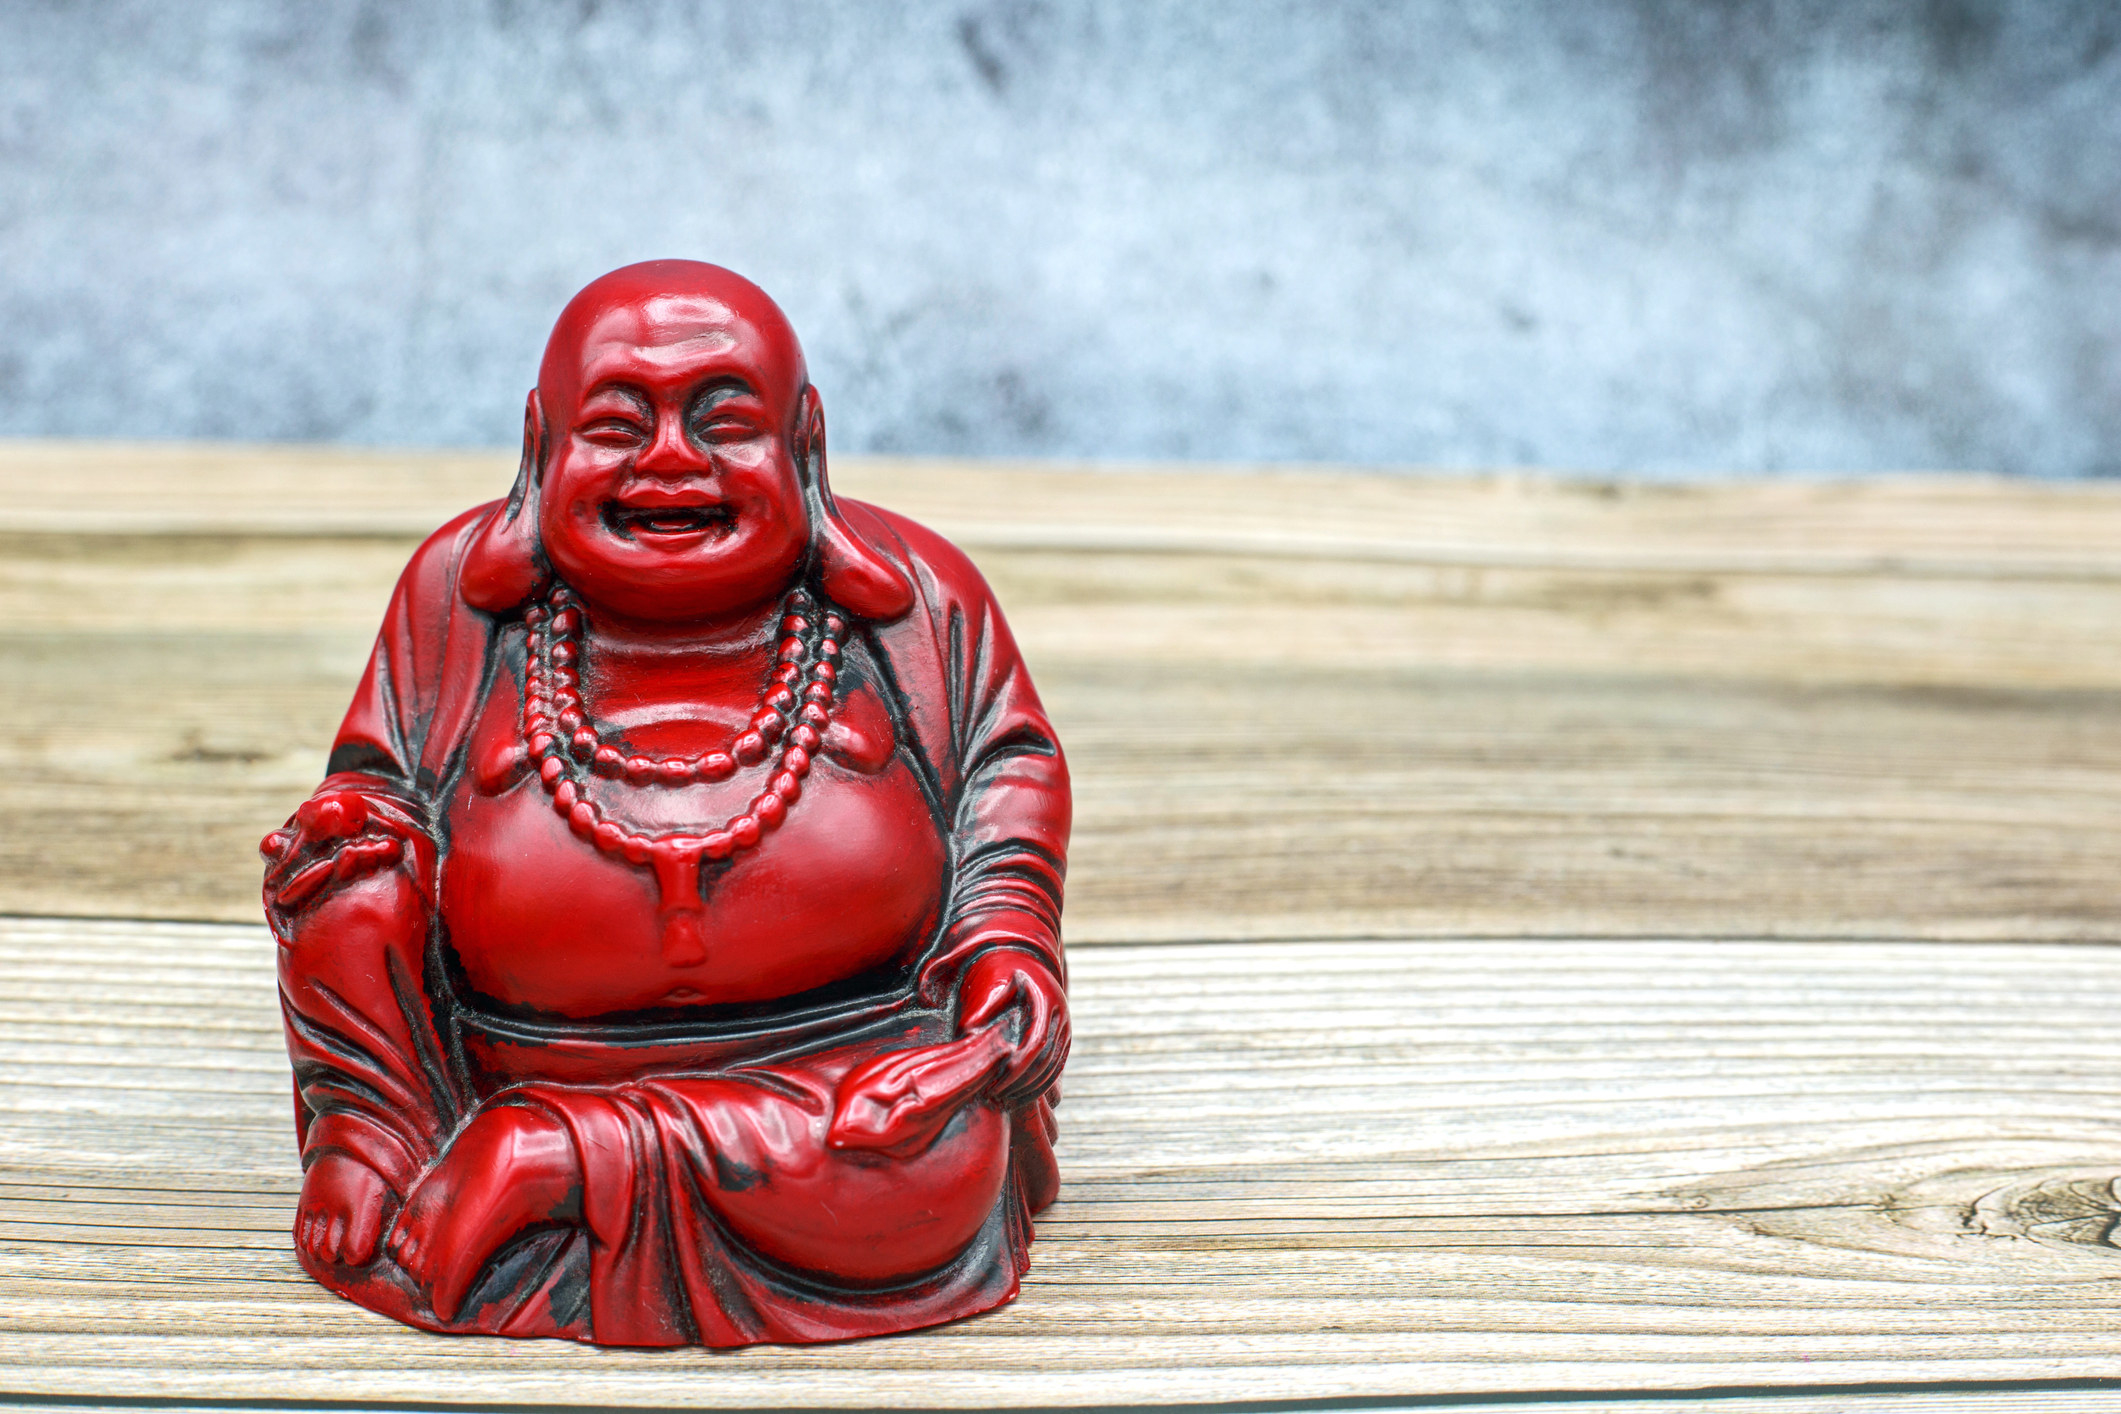 depiction of chubby smiling buddha